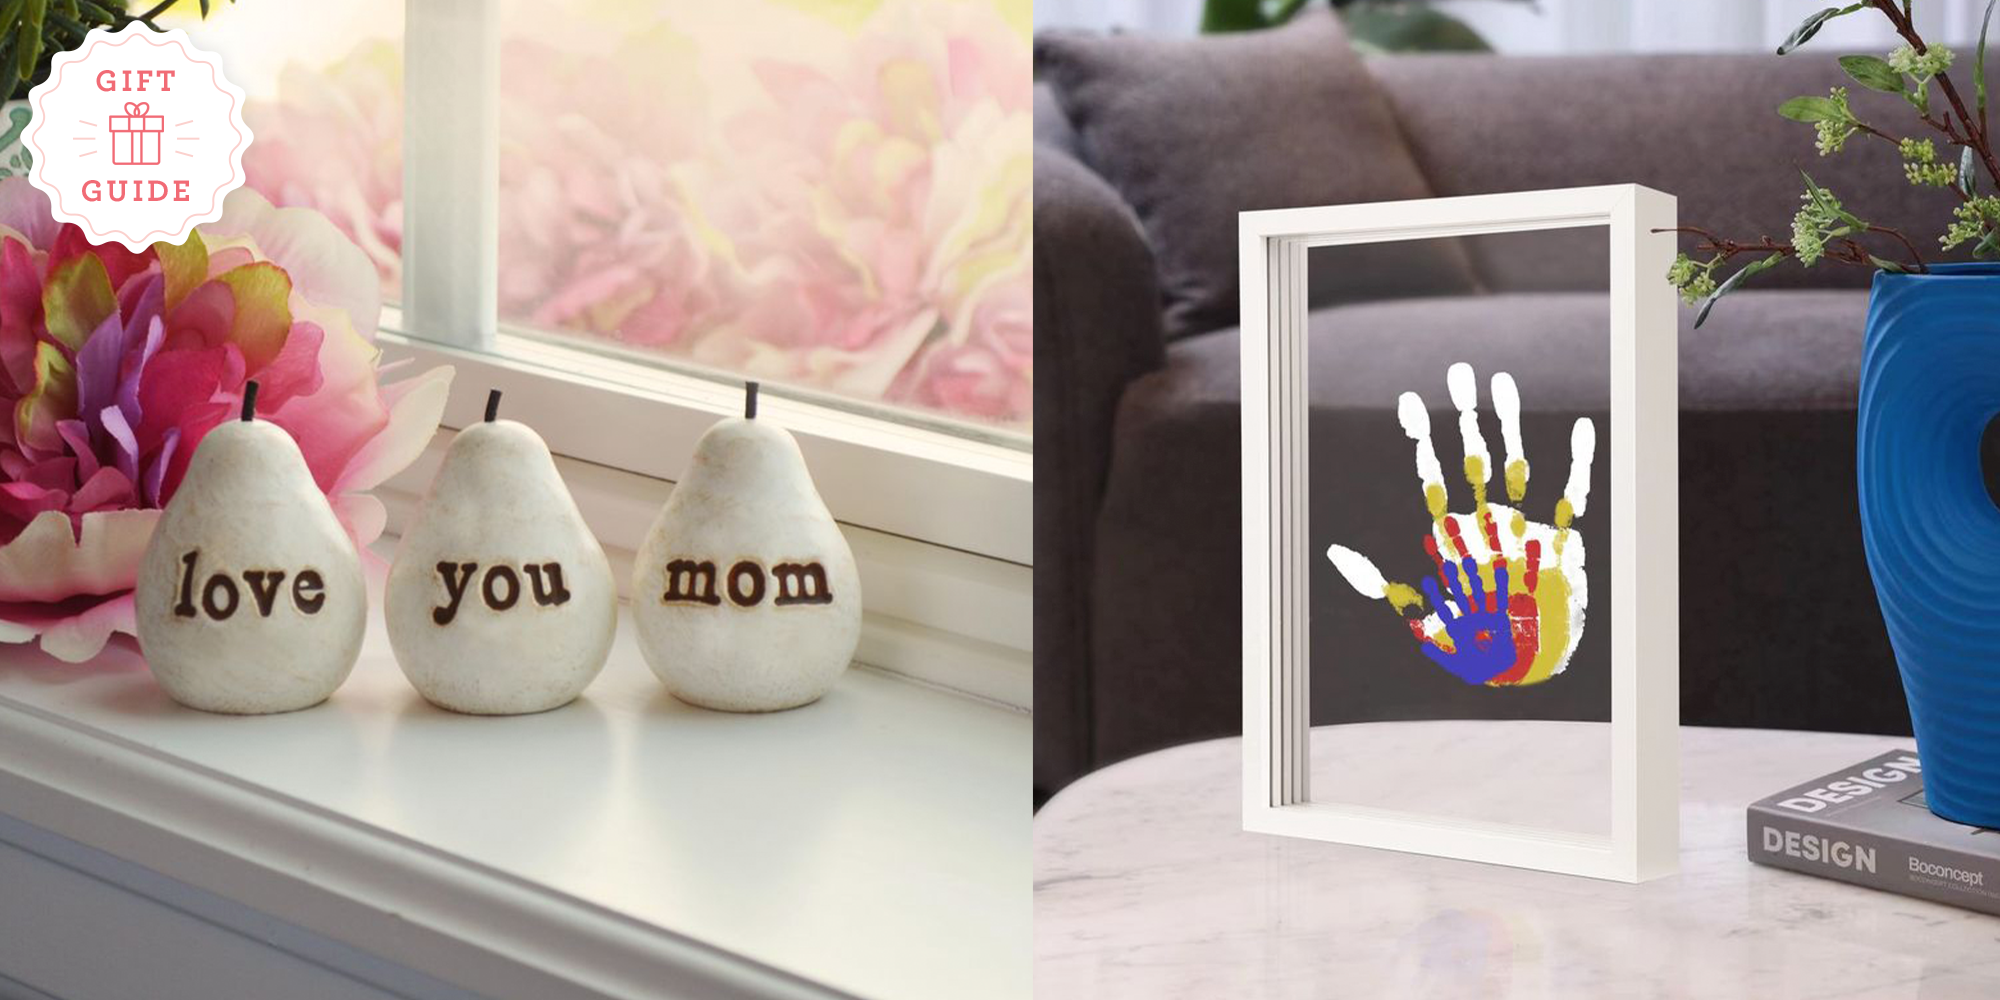 Gift Guide for Moms - {Quality & affordable ideas!}